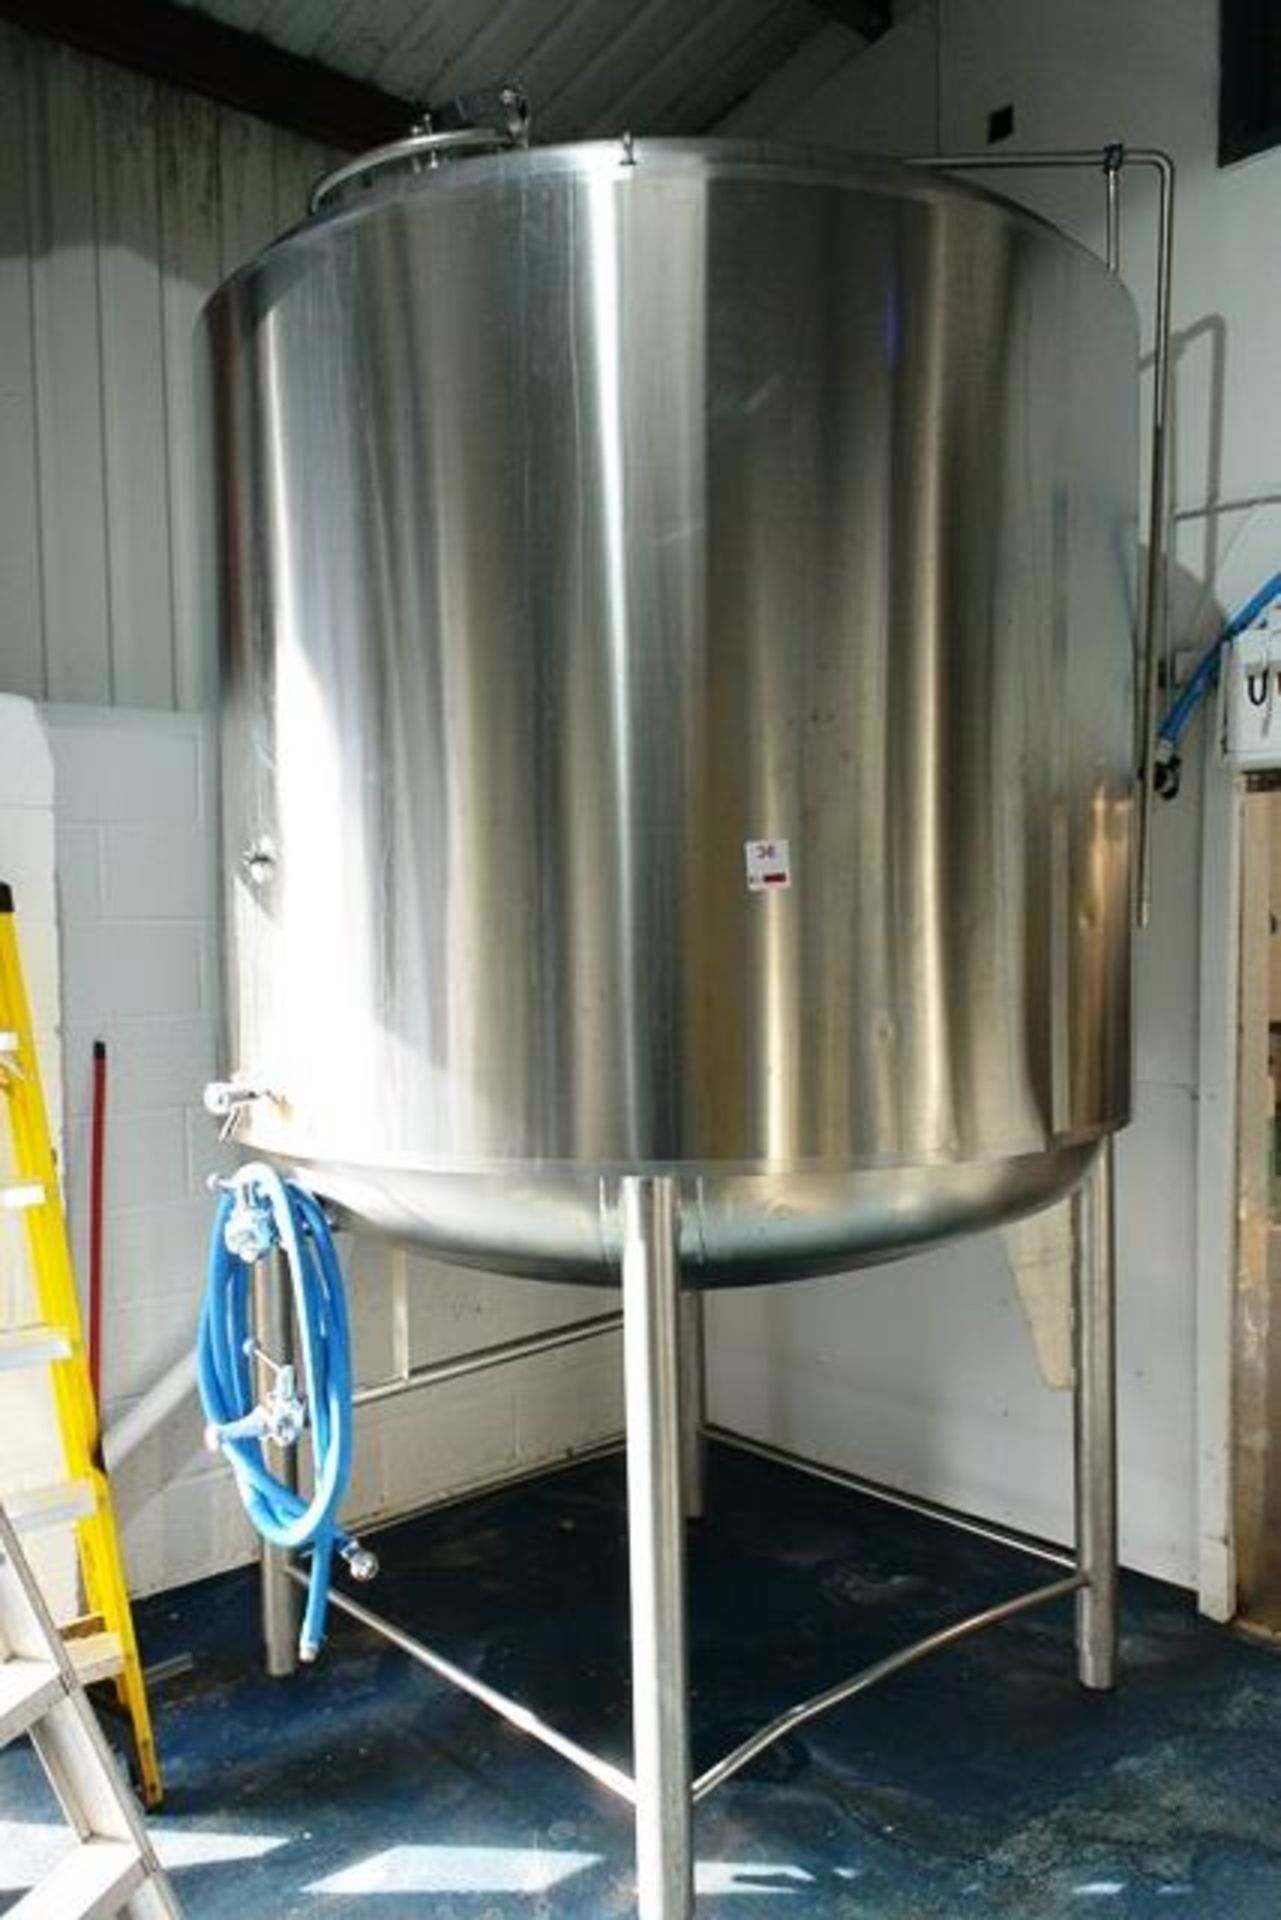 Fabdec stainless steel jacketed vertical cylindrical tank, model BFV-20-1206, serial no. 51-11-